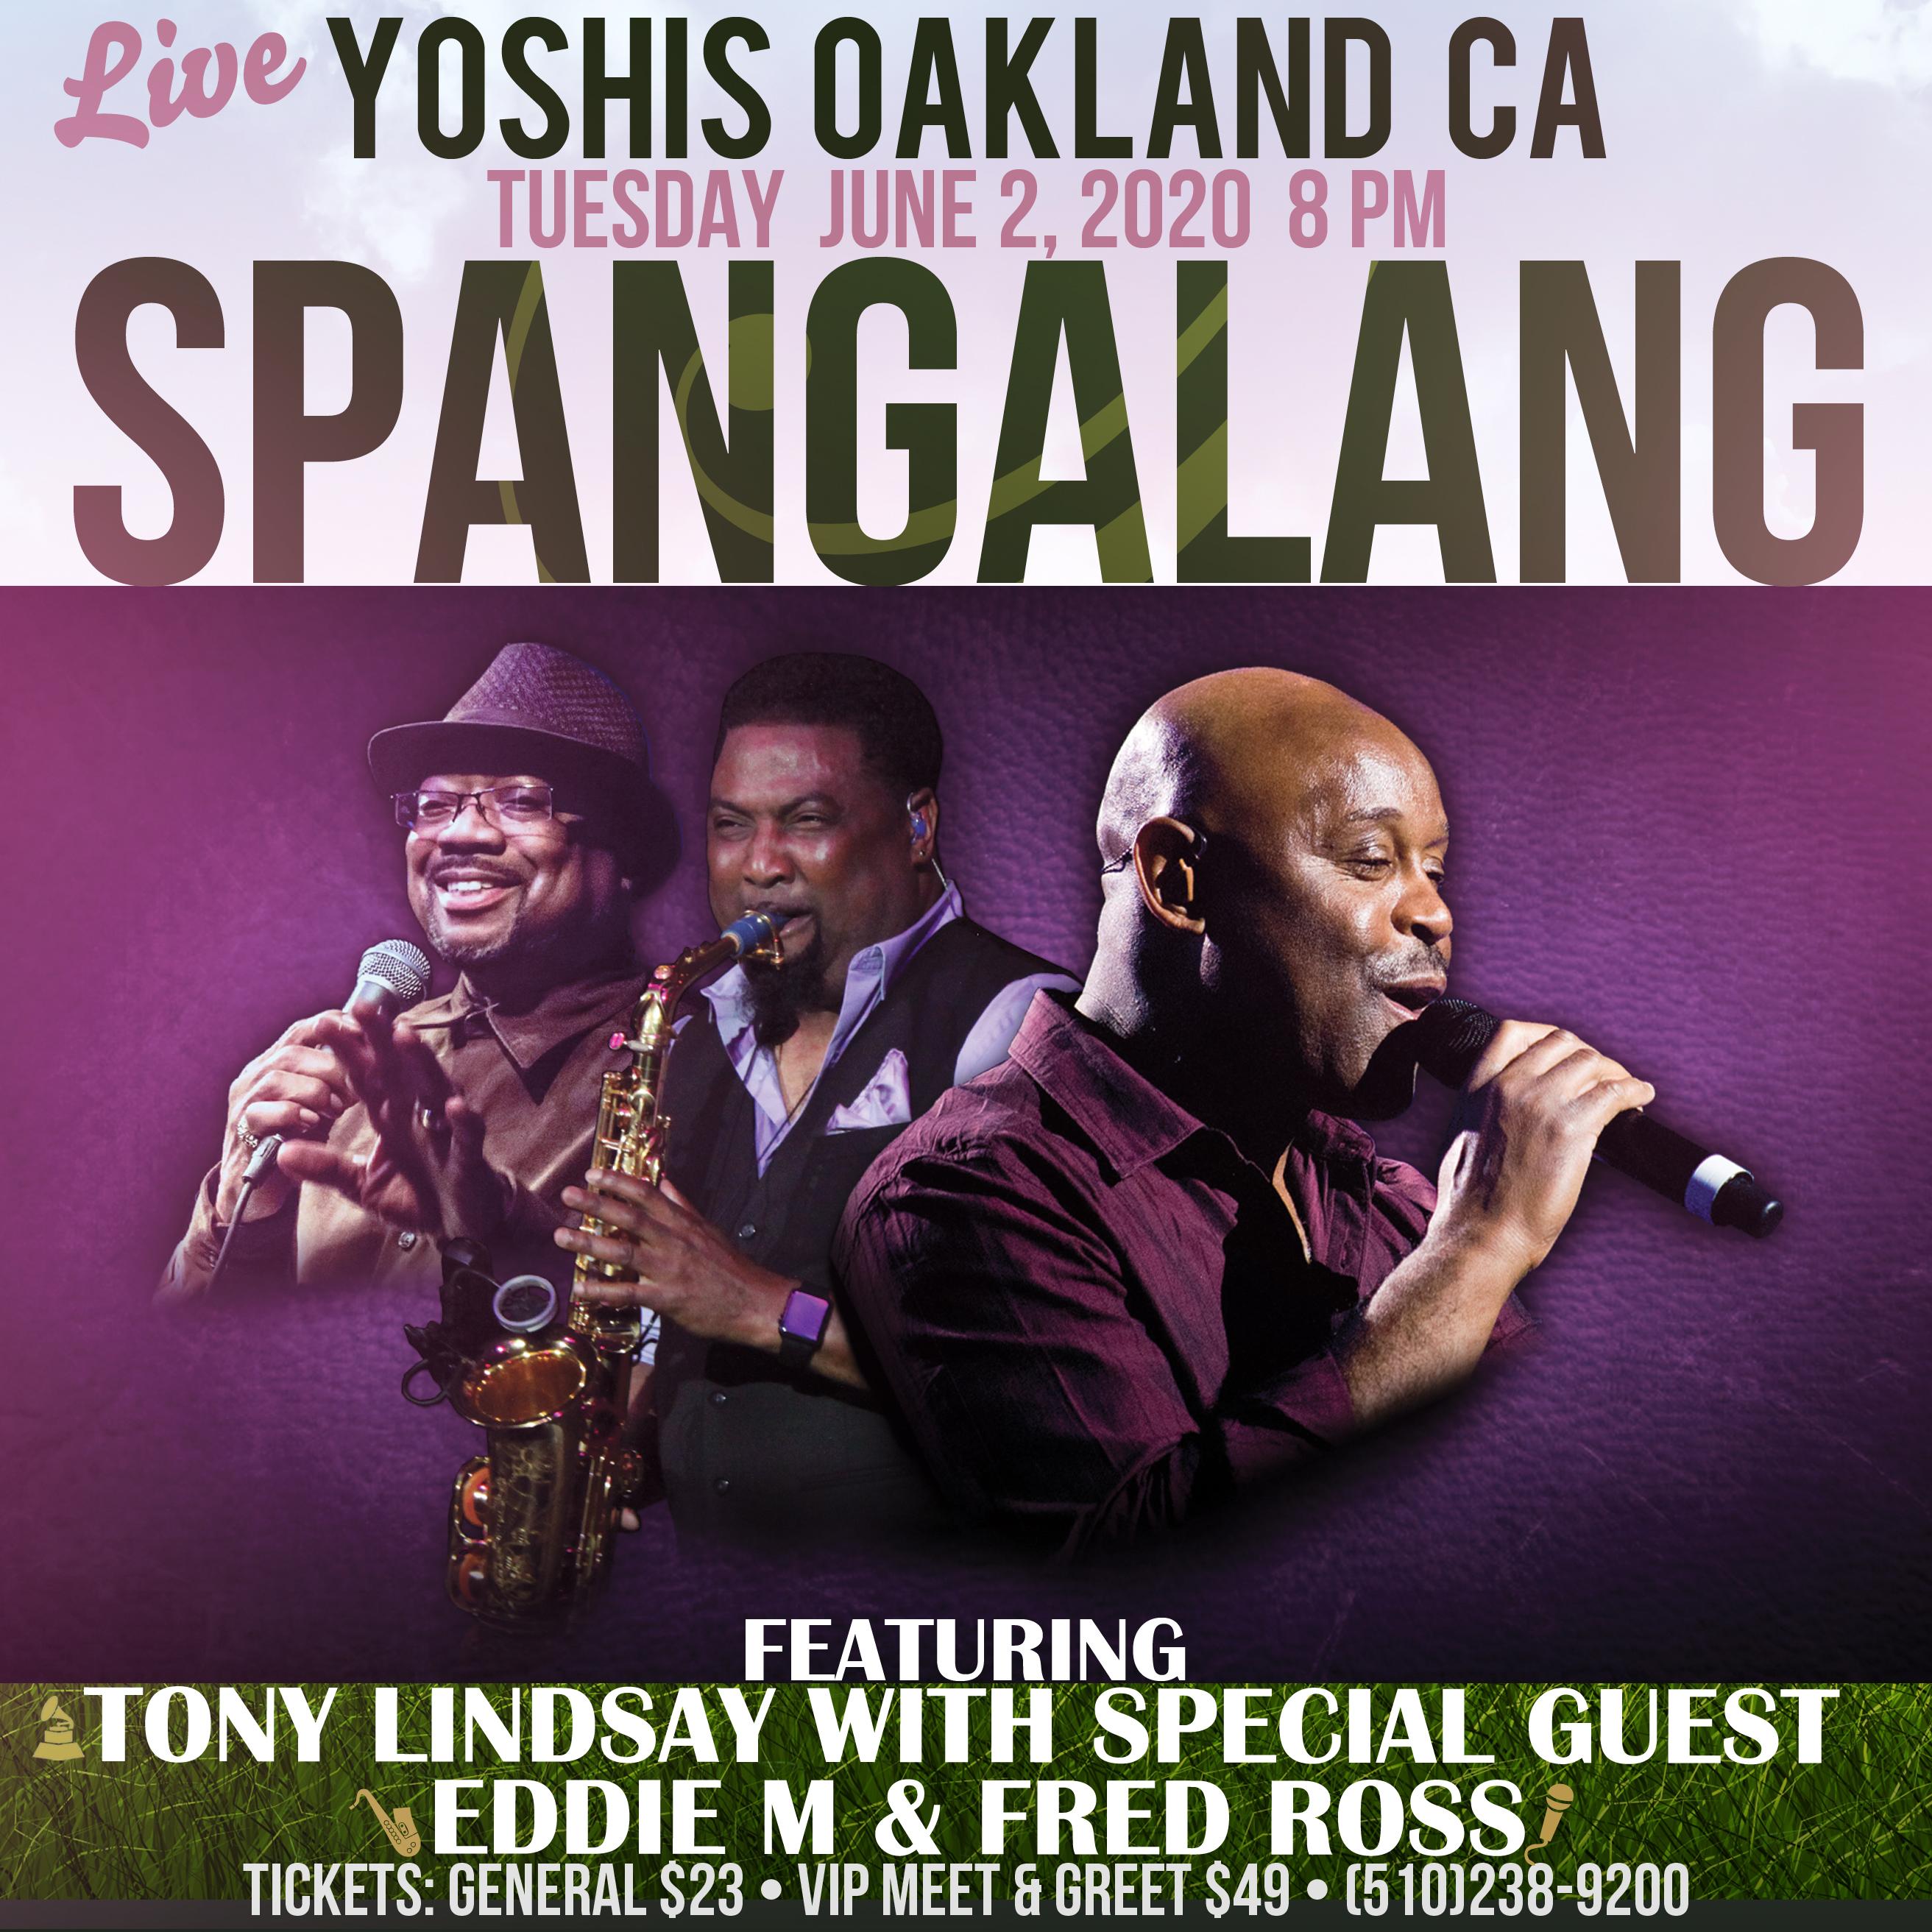 Spangalang feat. Tony Lindsay, Eddie Minifield, & Fred Ross